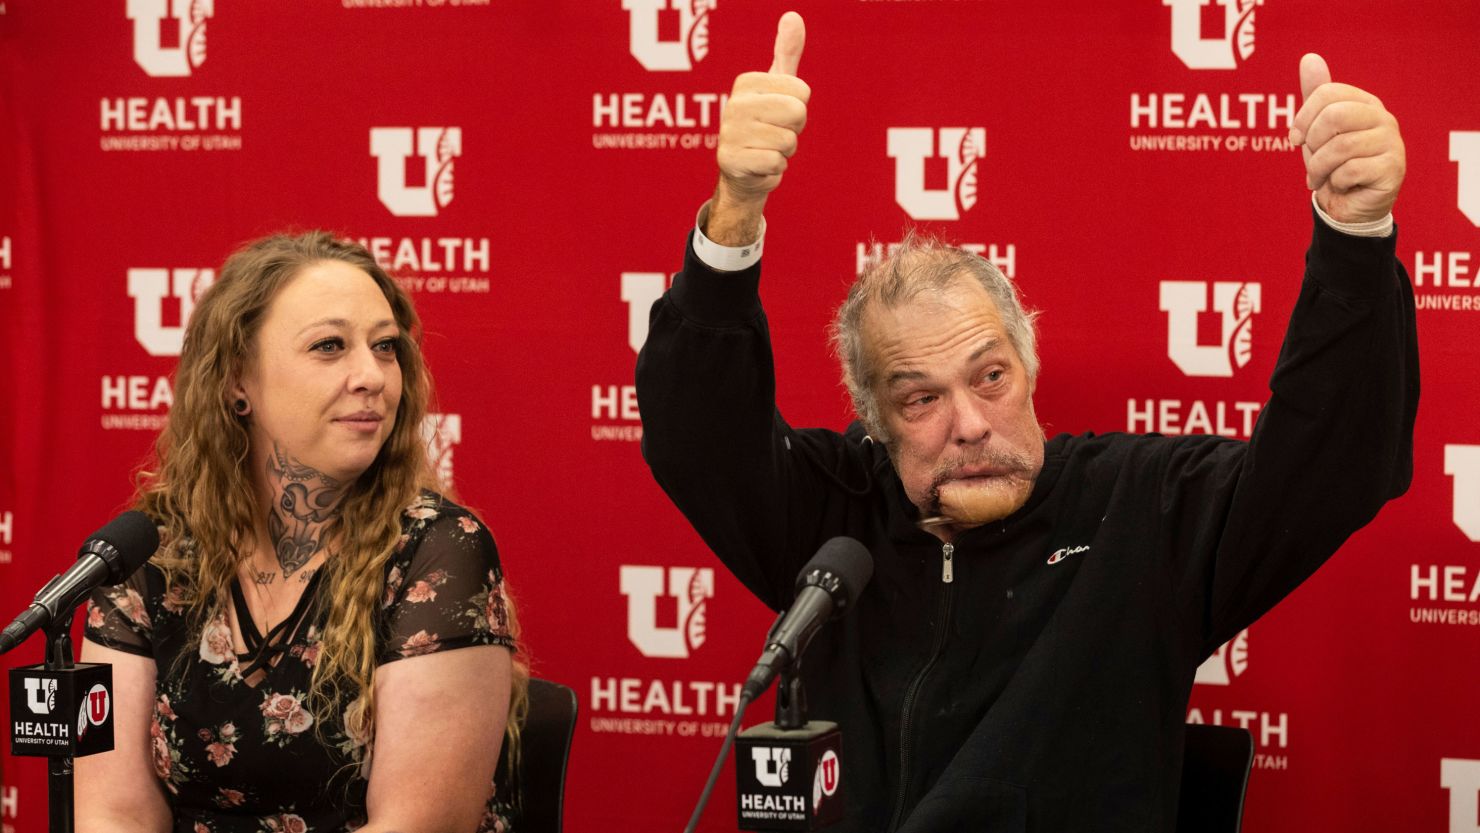 Rudy Noorlander, right, gives two thumbs up at a news conference with his daughter, Ashley Noorlander.